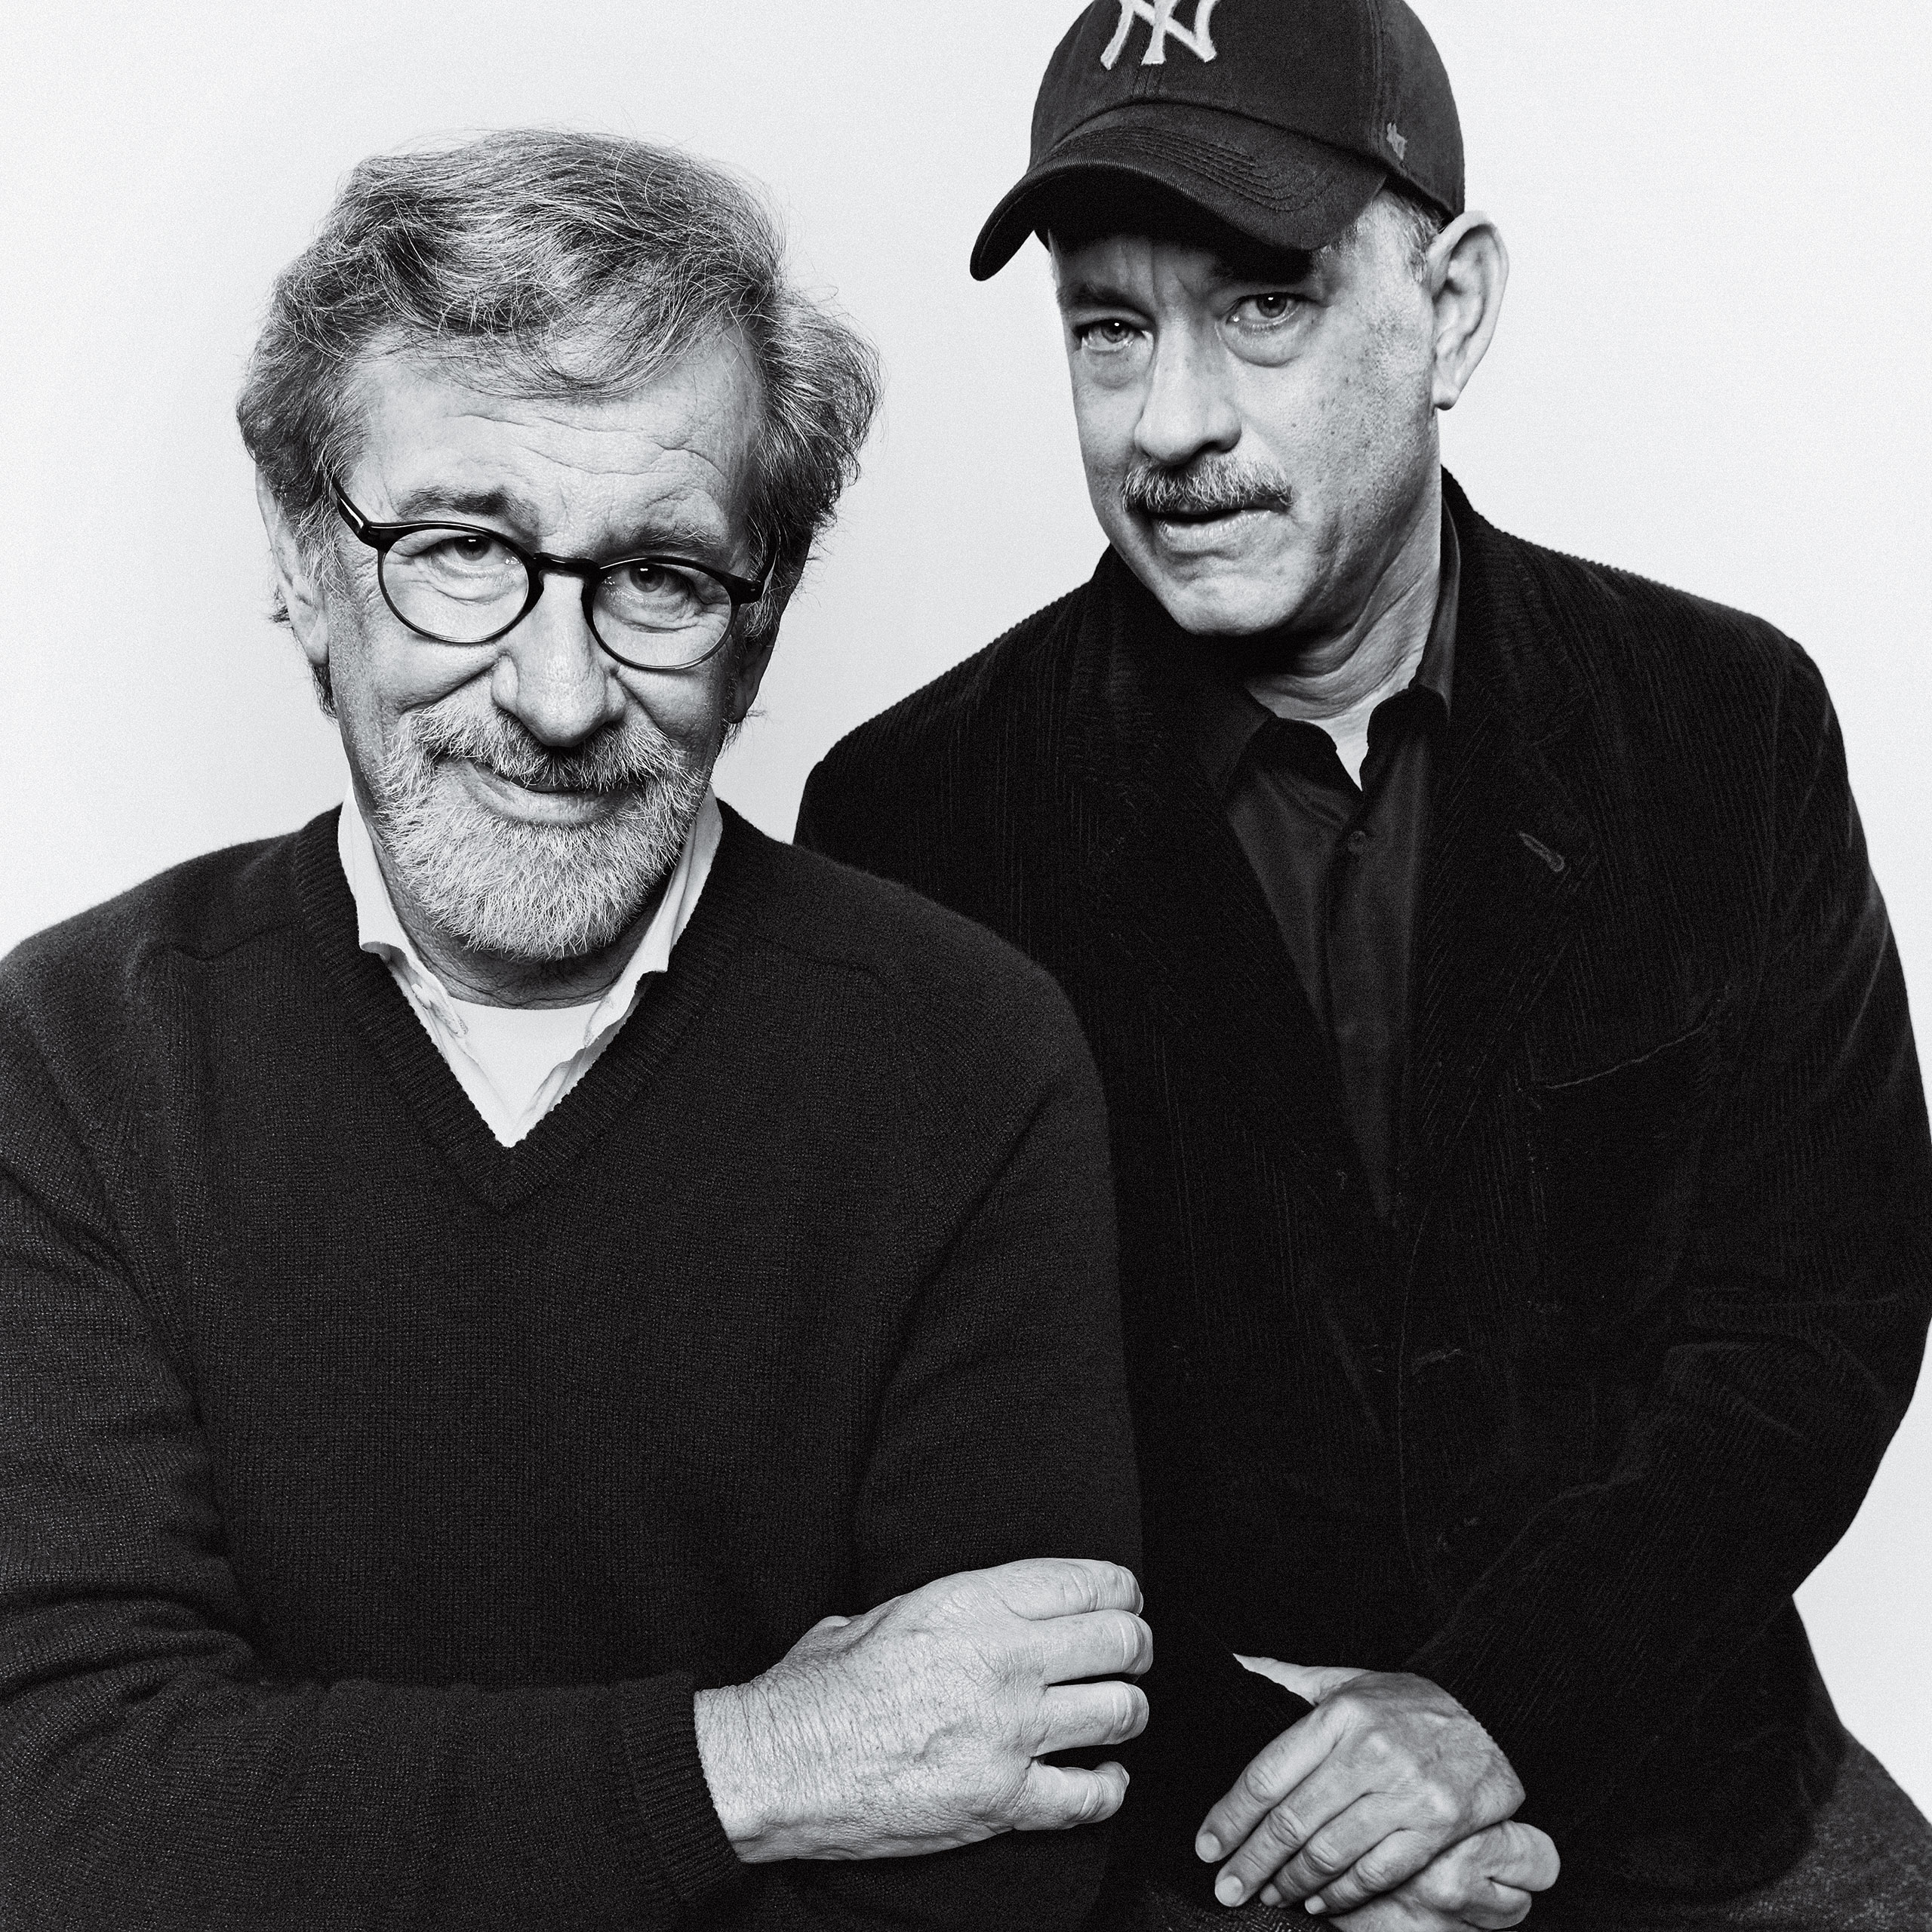 Portrait of director Steven Spielberg and actor Tom Hanks photographed at the Ritz Carlton hotel in New York City October 4, 2015.From  For Two Legends, History Is Personal.  October 19, 2015 issue.